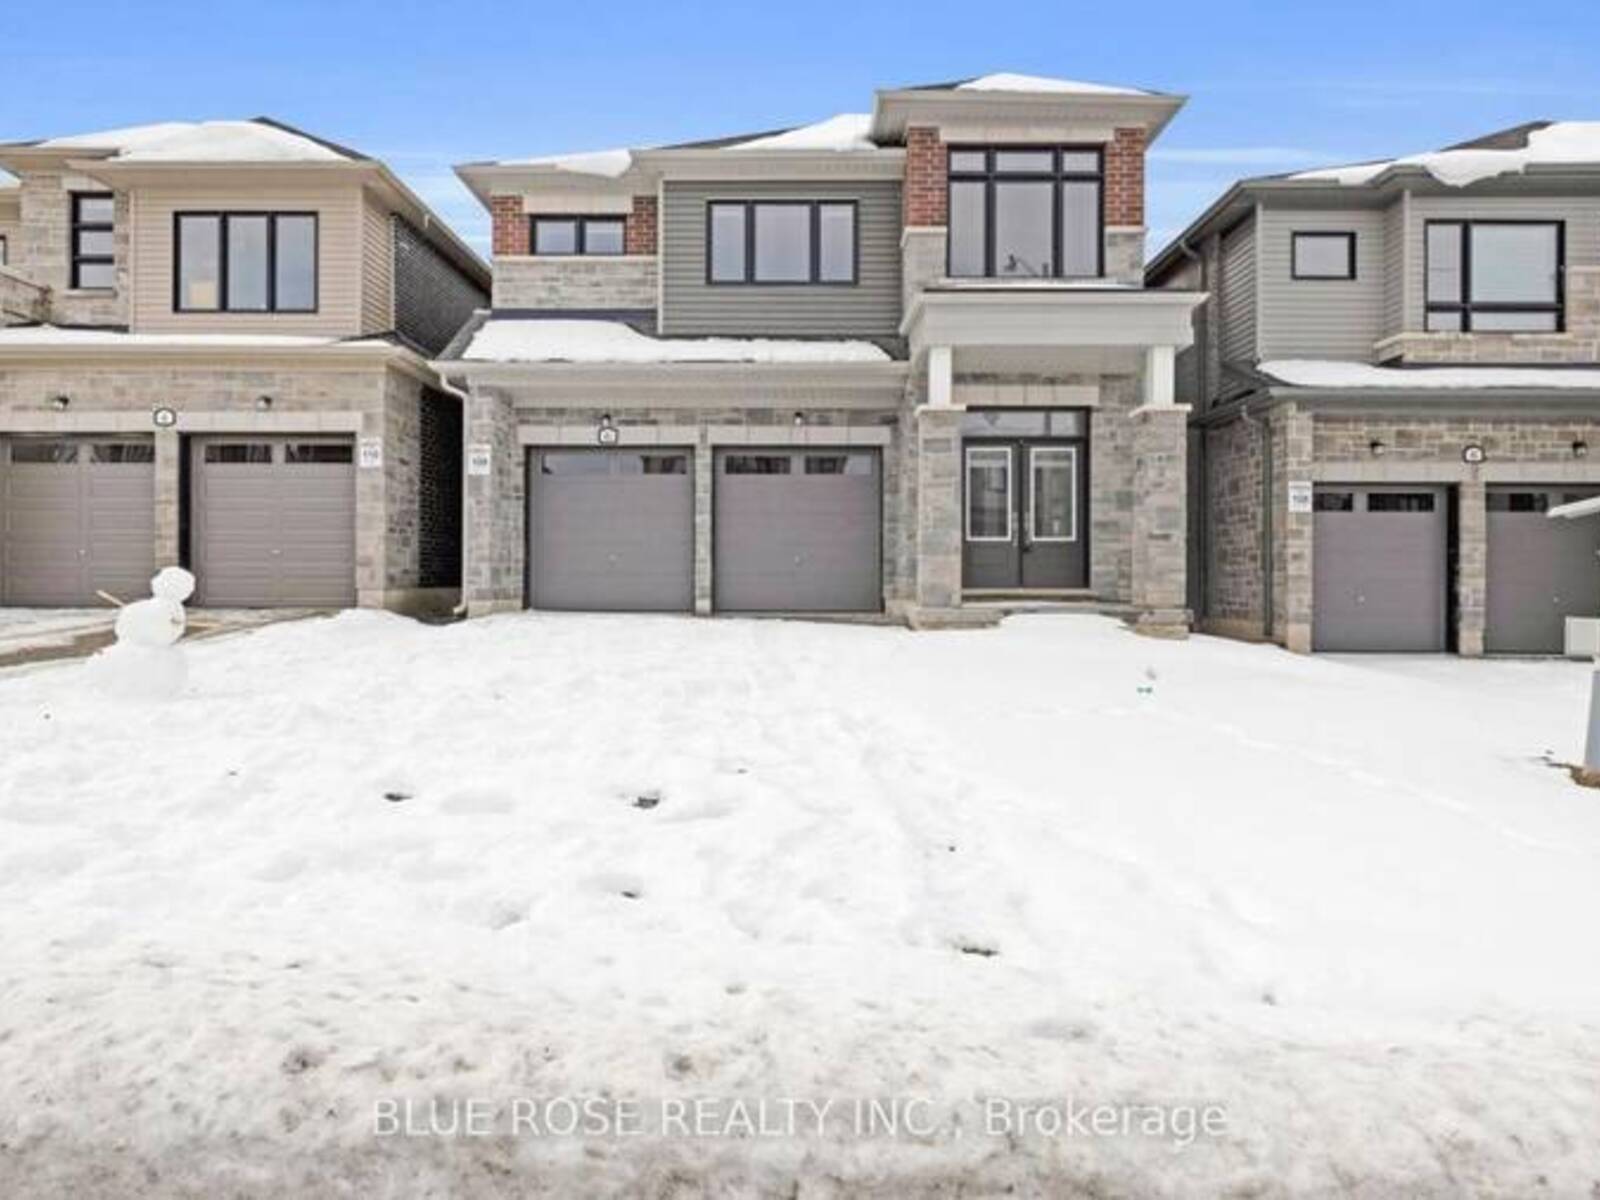 6 ABBEY CRESCENT, Barrie, Ontario L9J 0B7